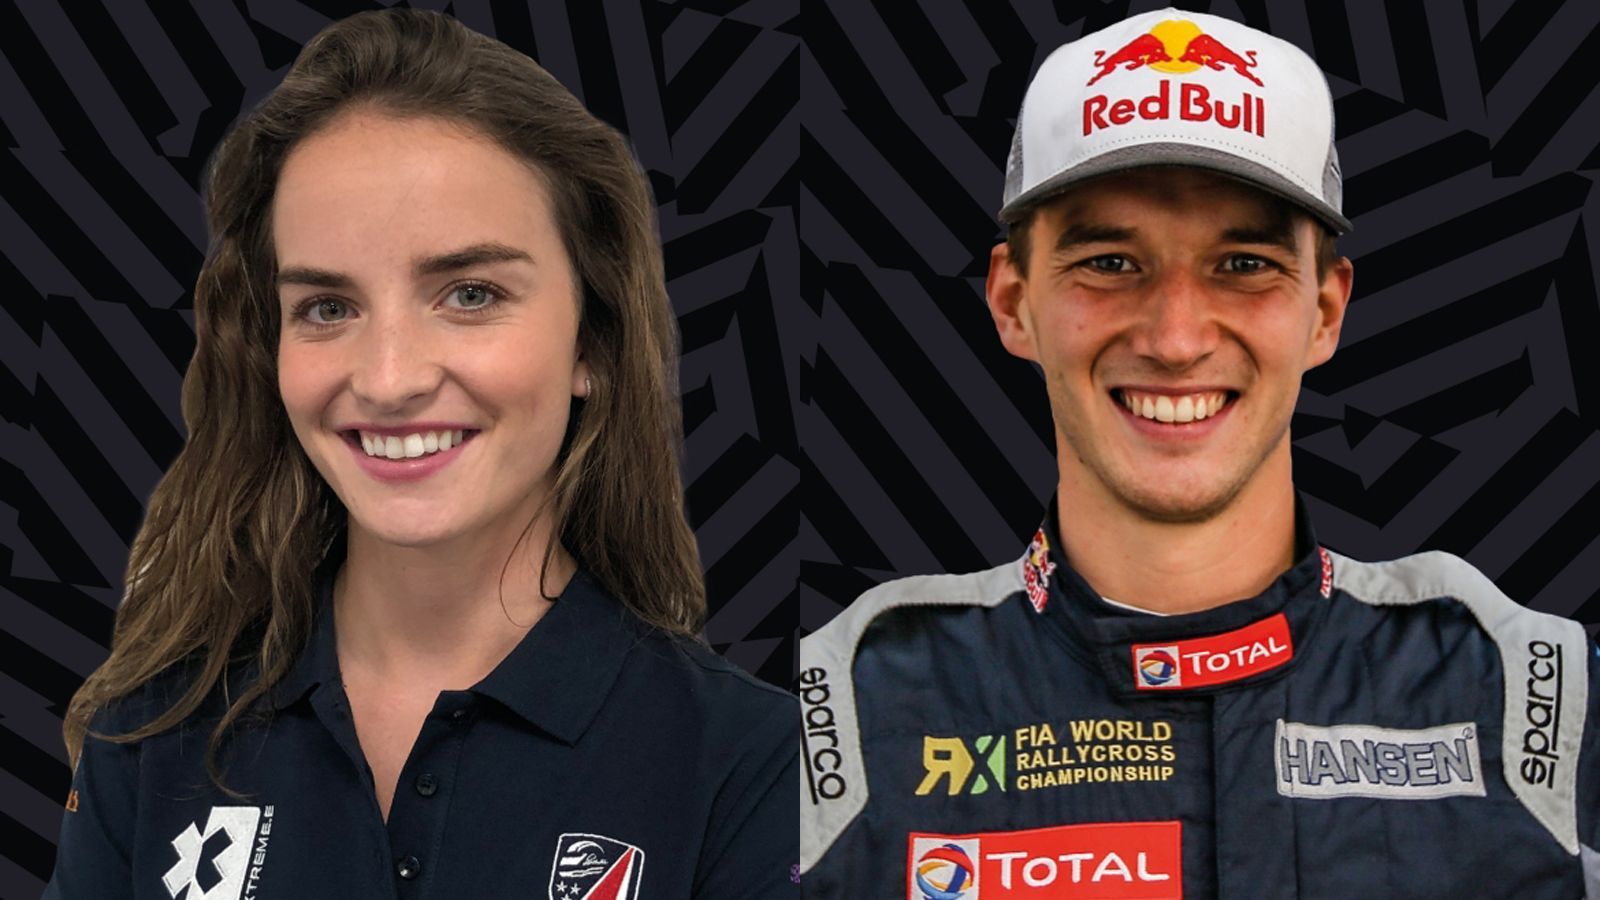 
                <strong>Andretti United Extreme E</strong><br>
                &#x2022; Fahrer: Catie Munnings (UK) u. Timmy Hansen (SWE) -<br>&#x2022; Team aus: USA -<br>&#x2022; Fusion aus Andretti Autosport (USA) und United Autosports (UK)<br>
              